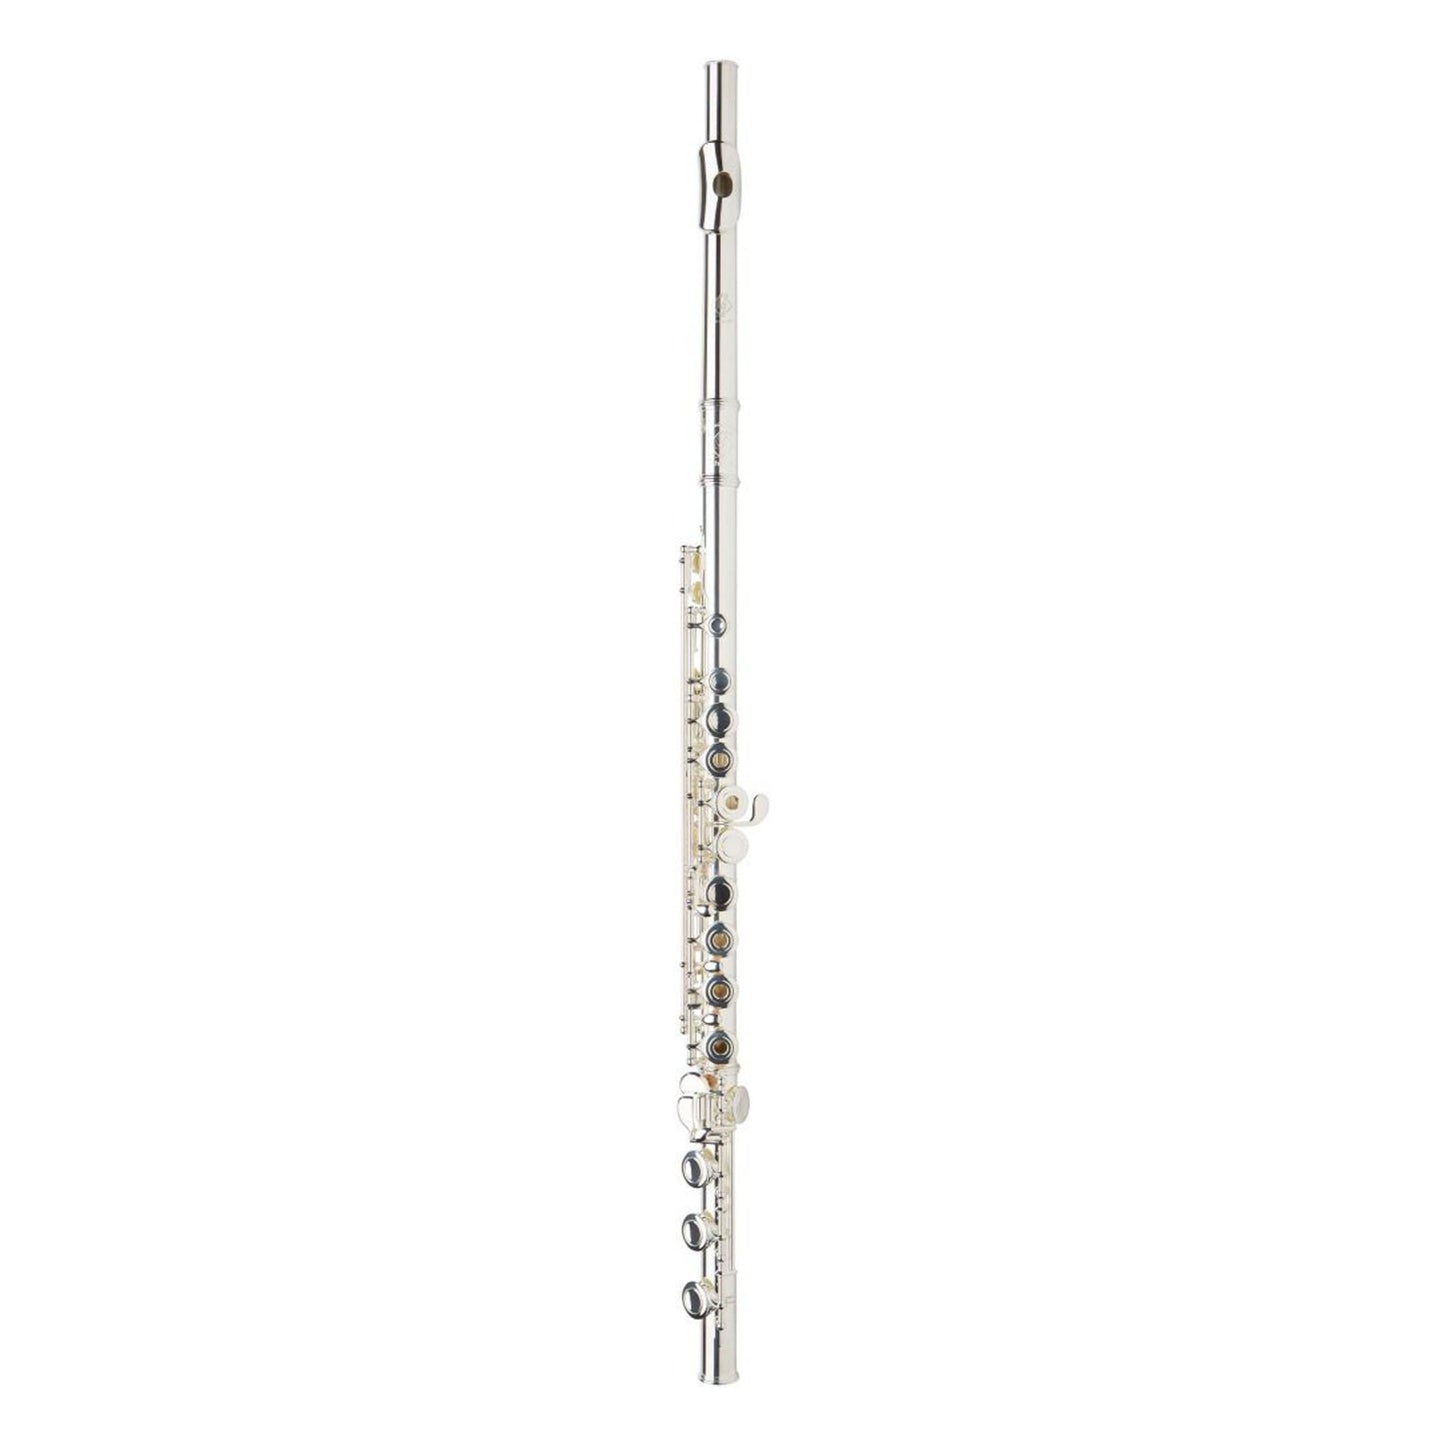 Gemeinhardt 3SBNG1 New Generation Flute Solid Silver with Low B Foot & Inline G